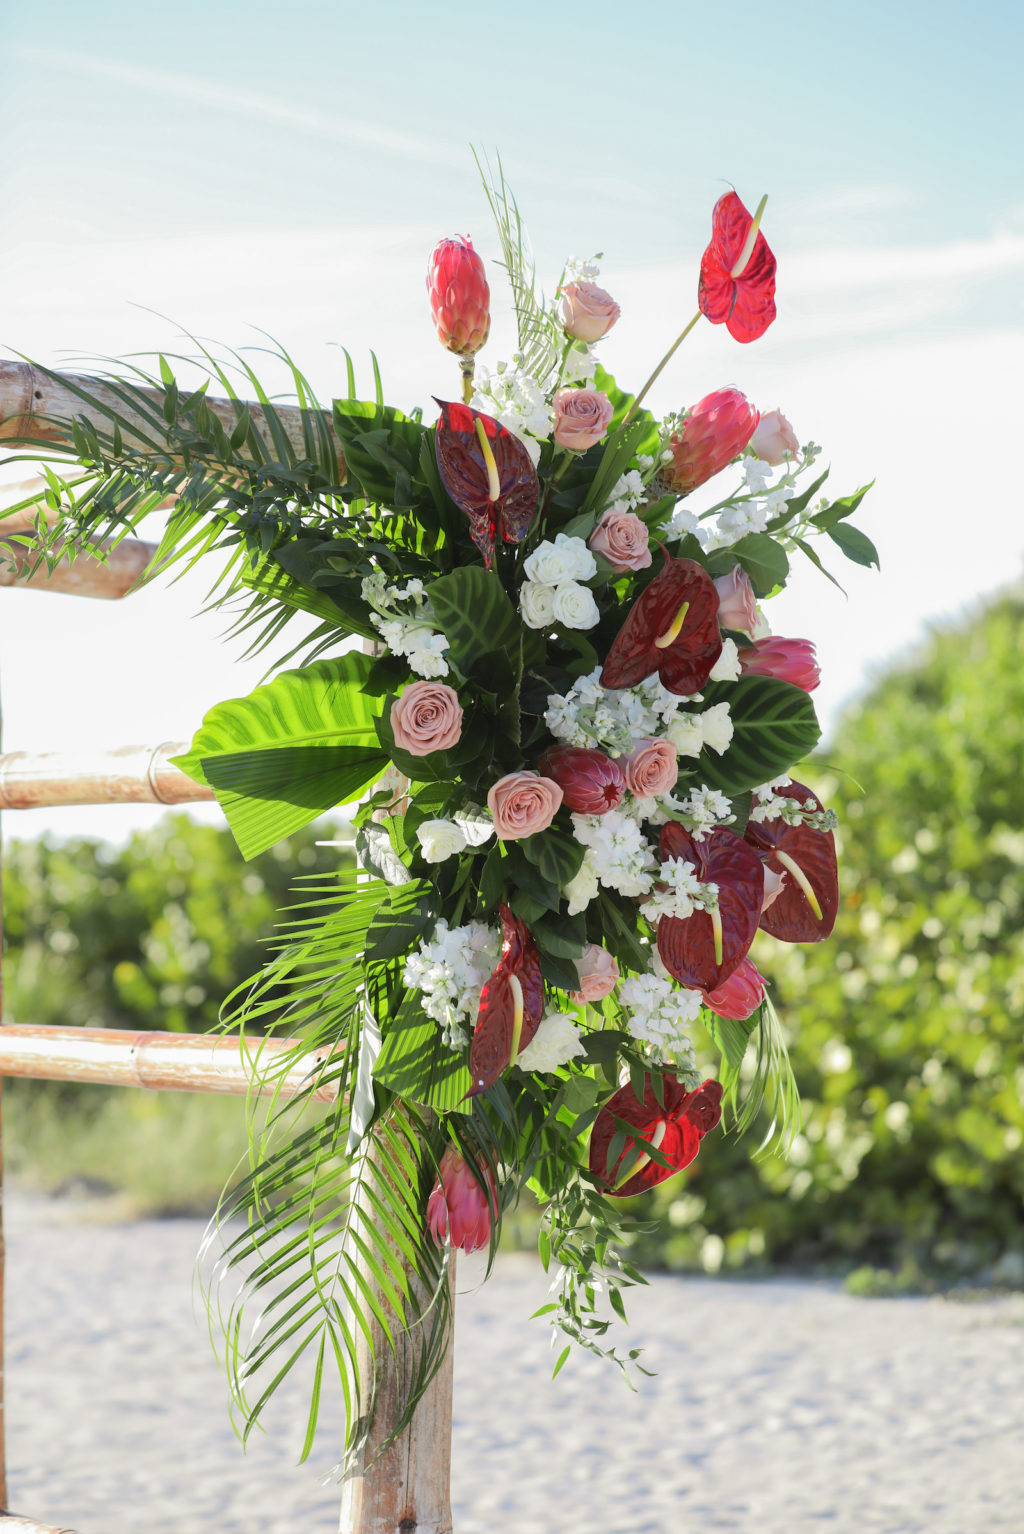 Tropical Wedding Ceremony Decor, Bamboo Arch with Lush Tropical Floral Arrangement, White and Pink Flowers, Burgundy Red Anthuriums, Palm Fronds | Tampa Bay Wedding Photographer Lifelong Photography Studio | St. Pete Beach Wedding Venue Postcard Inn | Wedding Florist Iza's Flowers